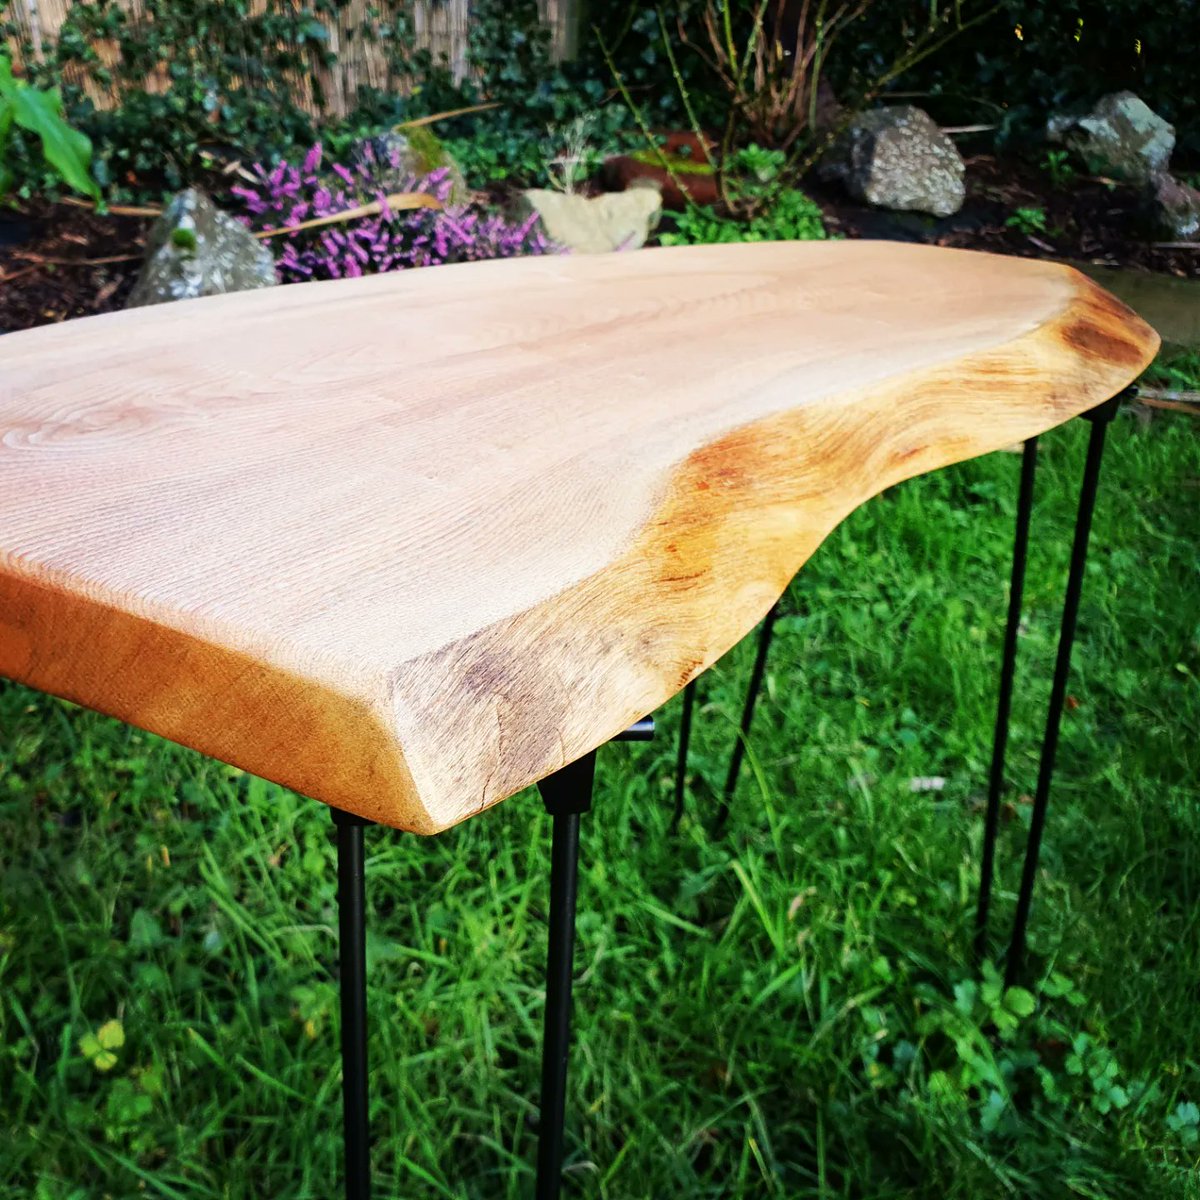 Maple Live edge table has turned out beautifully. Standing on 20 inch foldable hairpin legs and coated in Osmo's premium oil & nautral wax finish. It looks fantastic.

Am ideal piece for someone's home or office.

Price:£80

#bmbarrels
#stgeorgesmarketbelfast 
#irishart